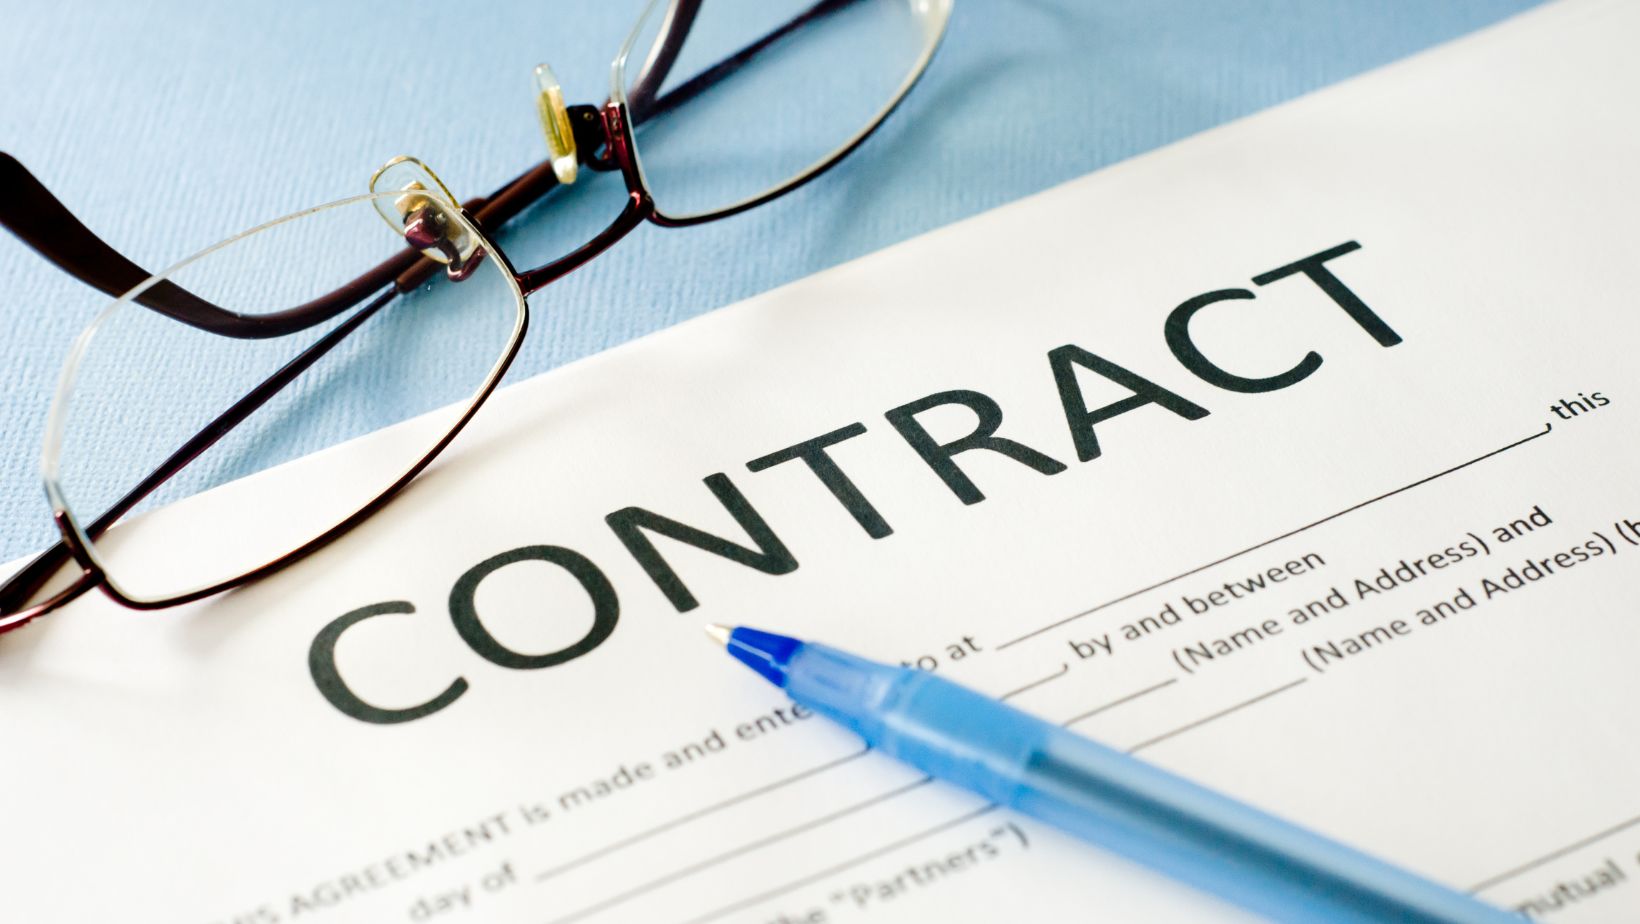 is not an element of a valid contract